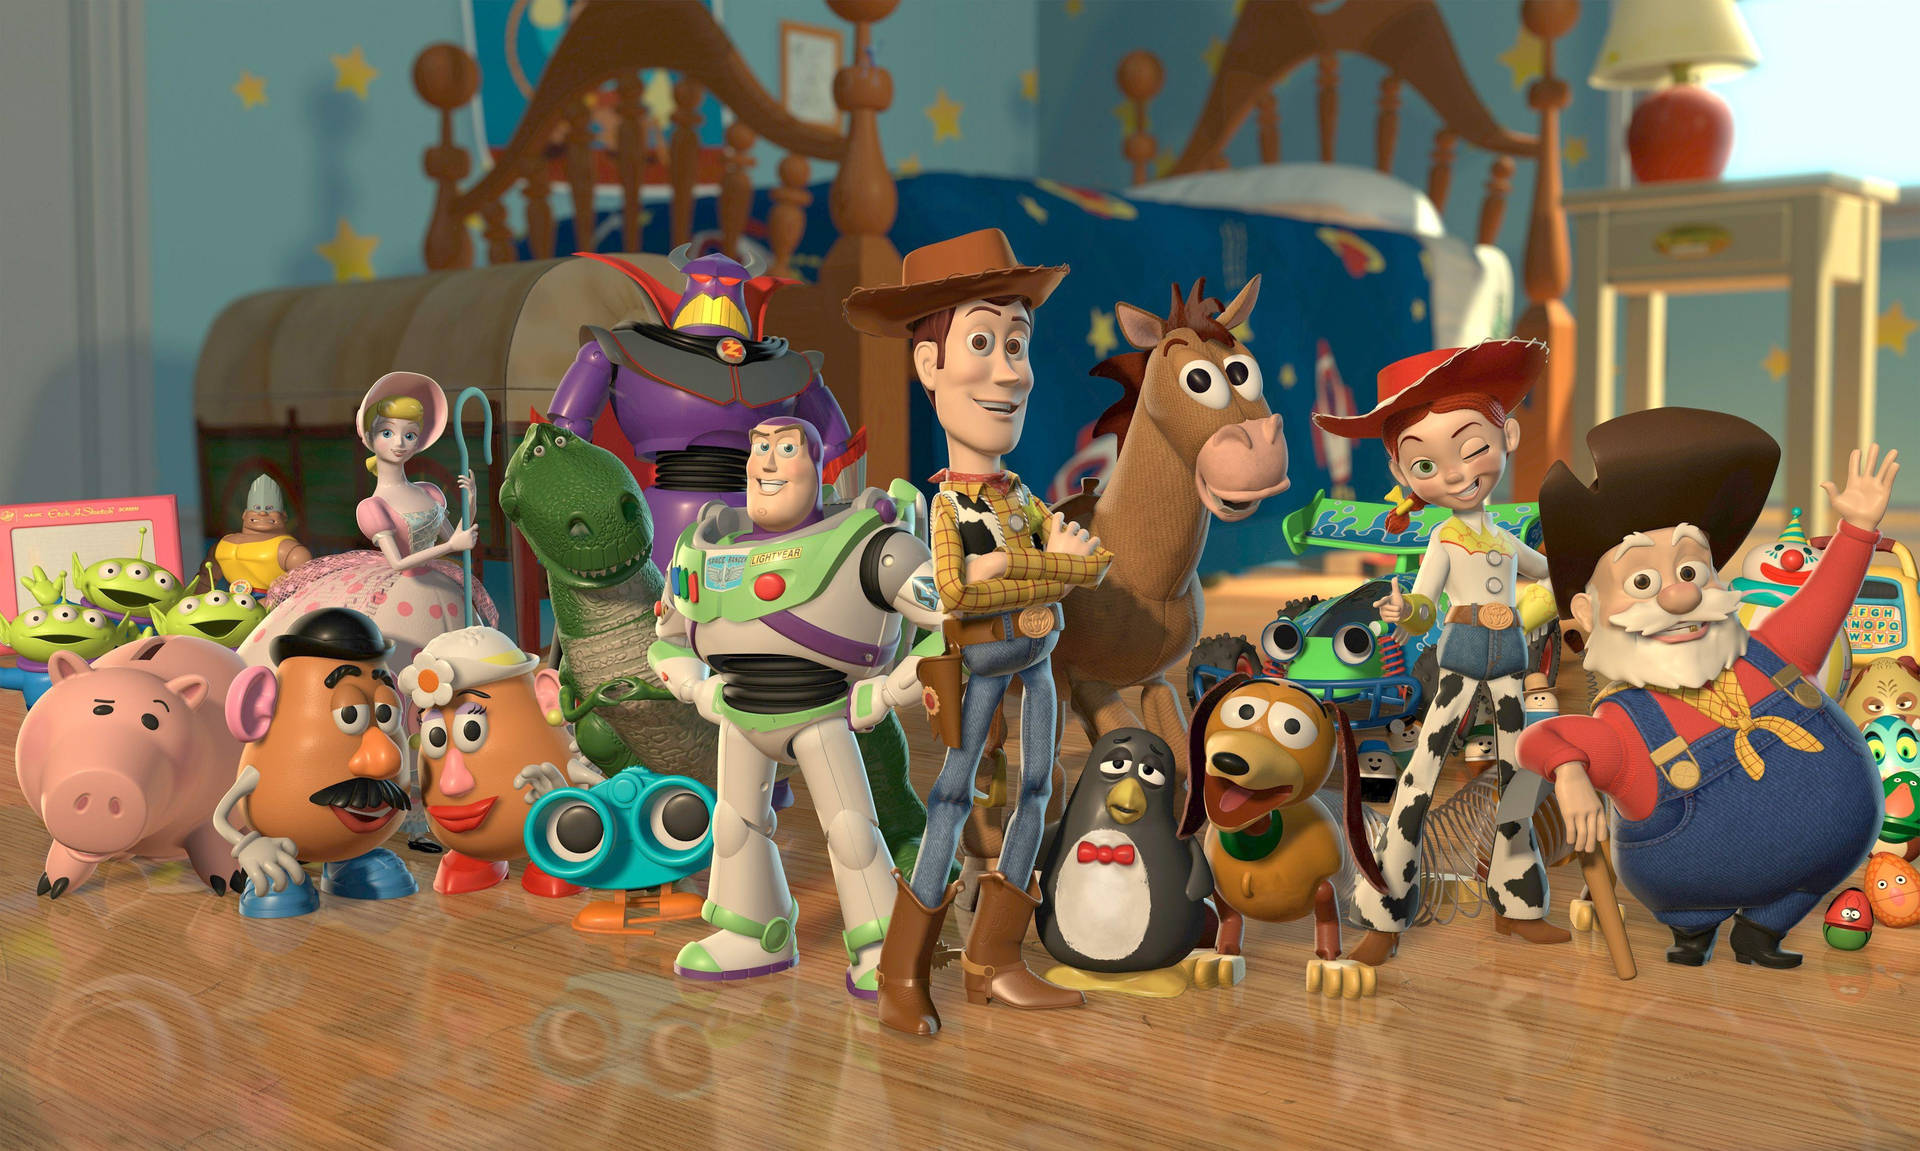 Top 999+ Toy Story Wallpaper Full HD, 4K✅Free to Use